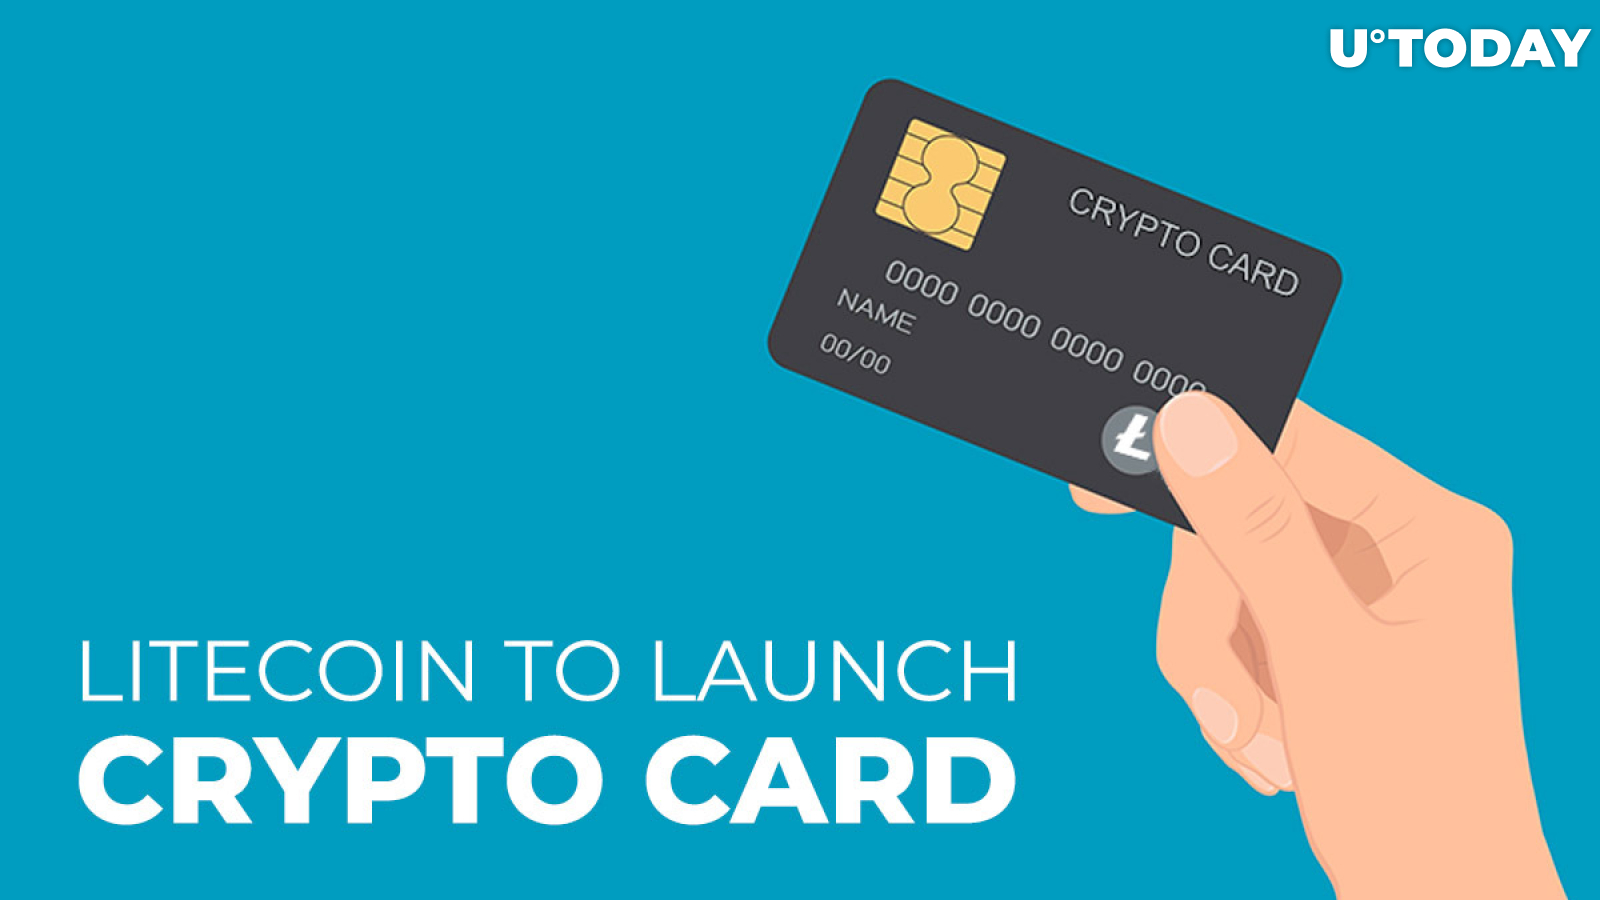 Litecoin (LTC) to Launch Crypto Card Partnering with Bibox and Ternio